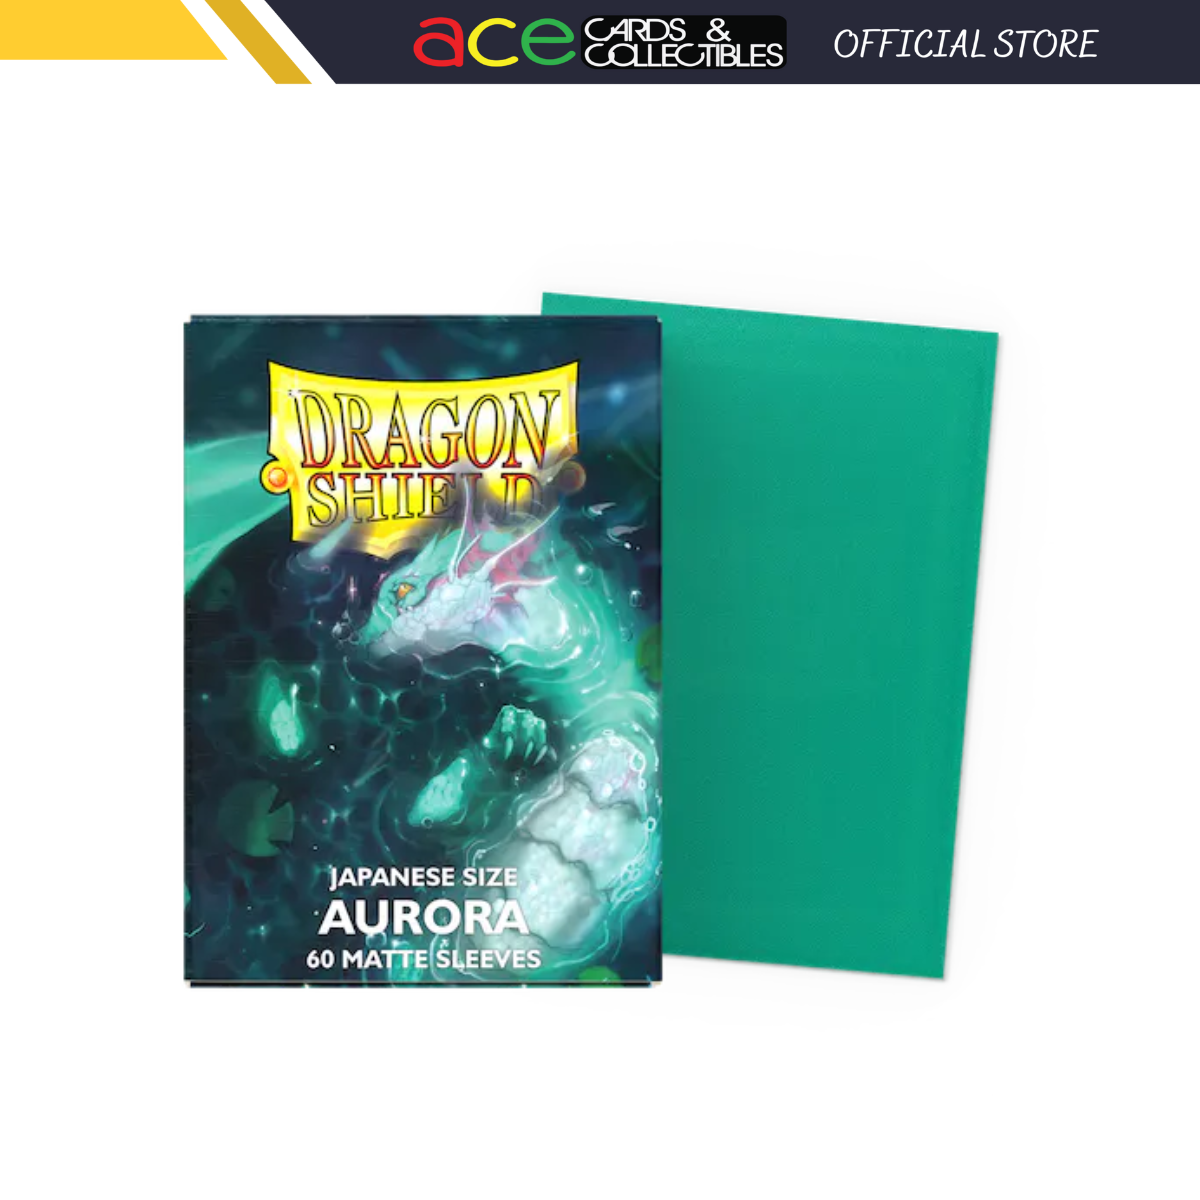 Dragon Shield Deck Protector Matte Sleeves 60pcs - "Aurora" (Japanese Size)-Dragon Shield-Ace Cards & Collectibles